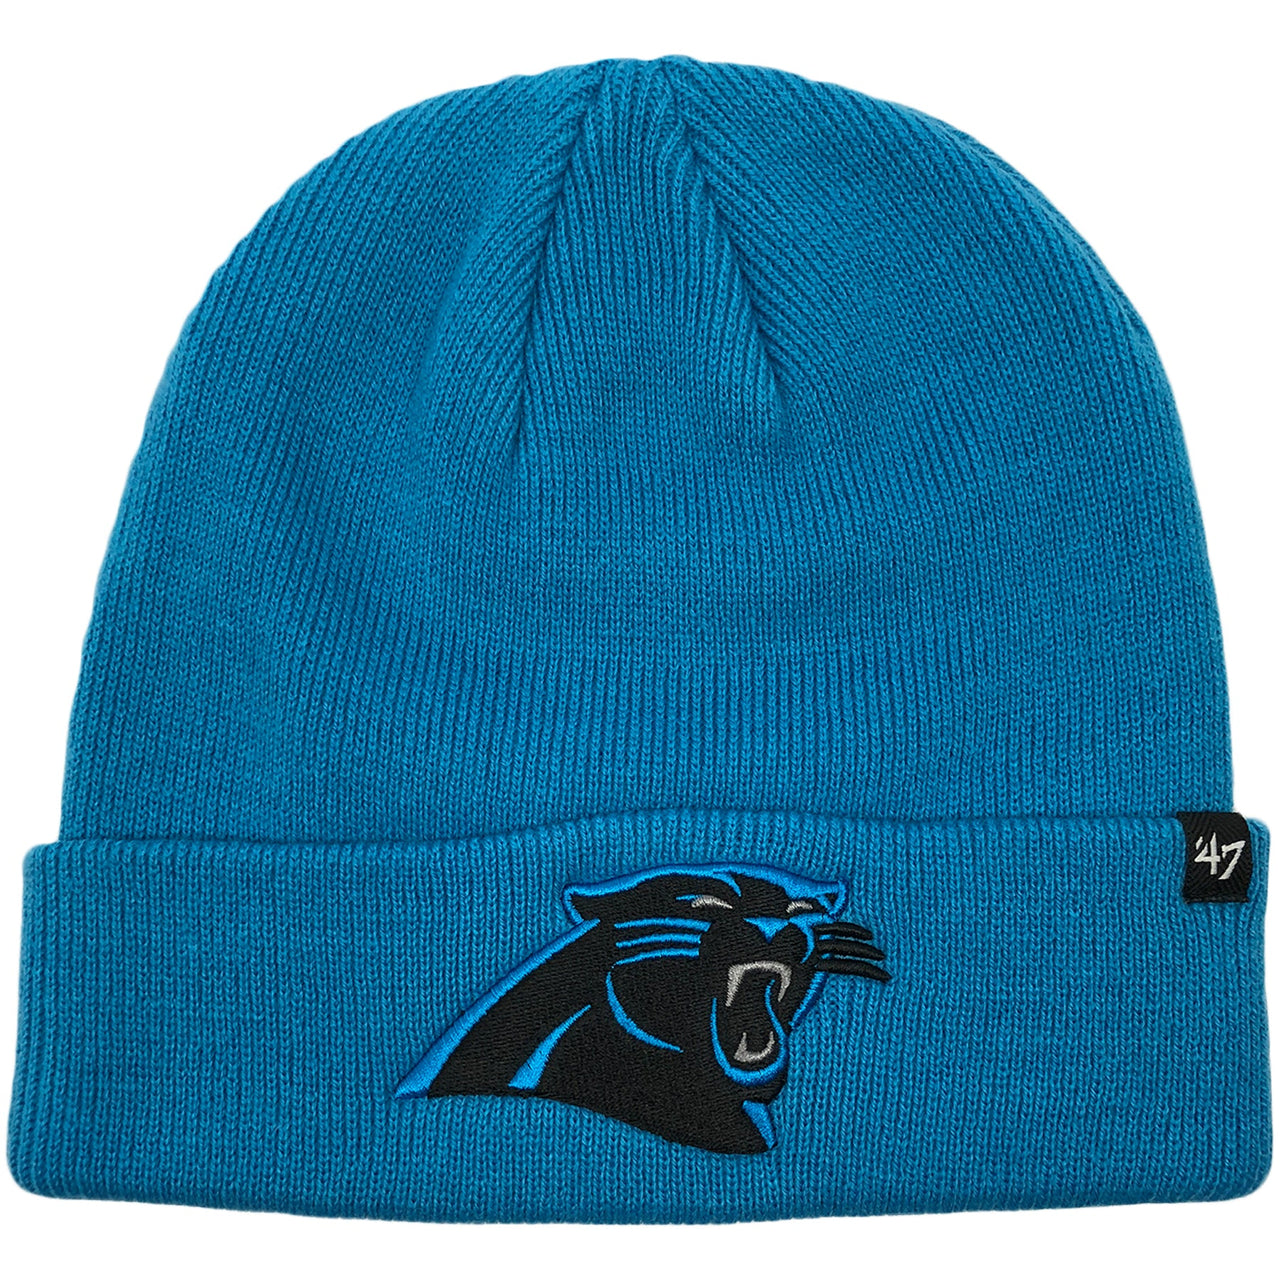 the Carolina Panthers Carolina Blue Knit Raised Cuff Beanie has the Carolina Panthers logo embroidered on the front in black